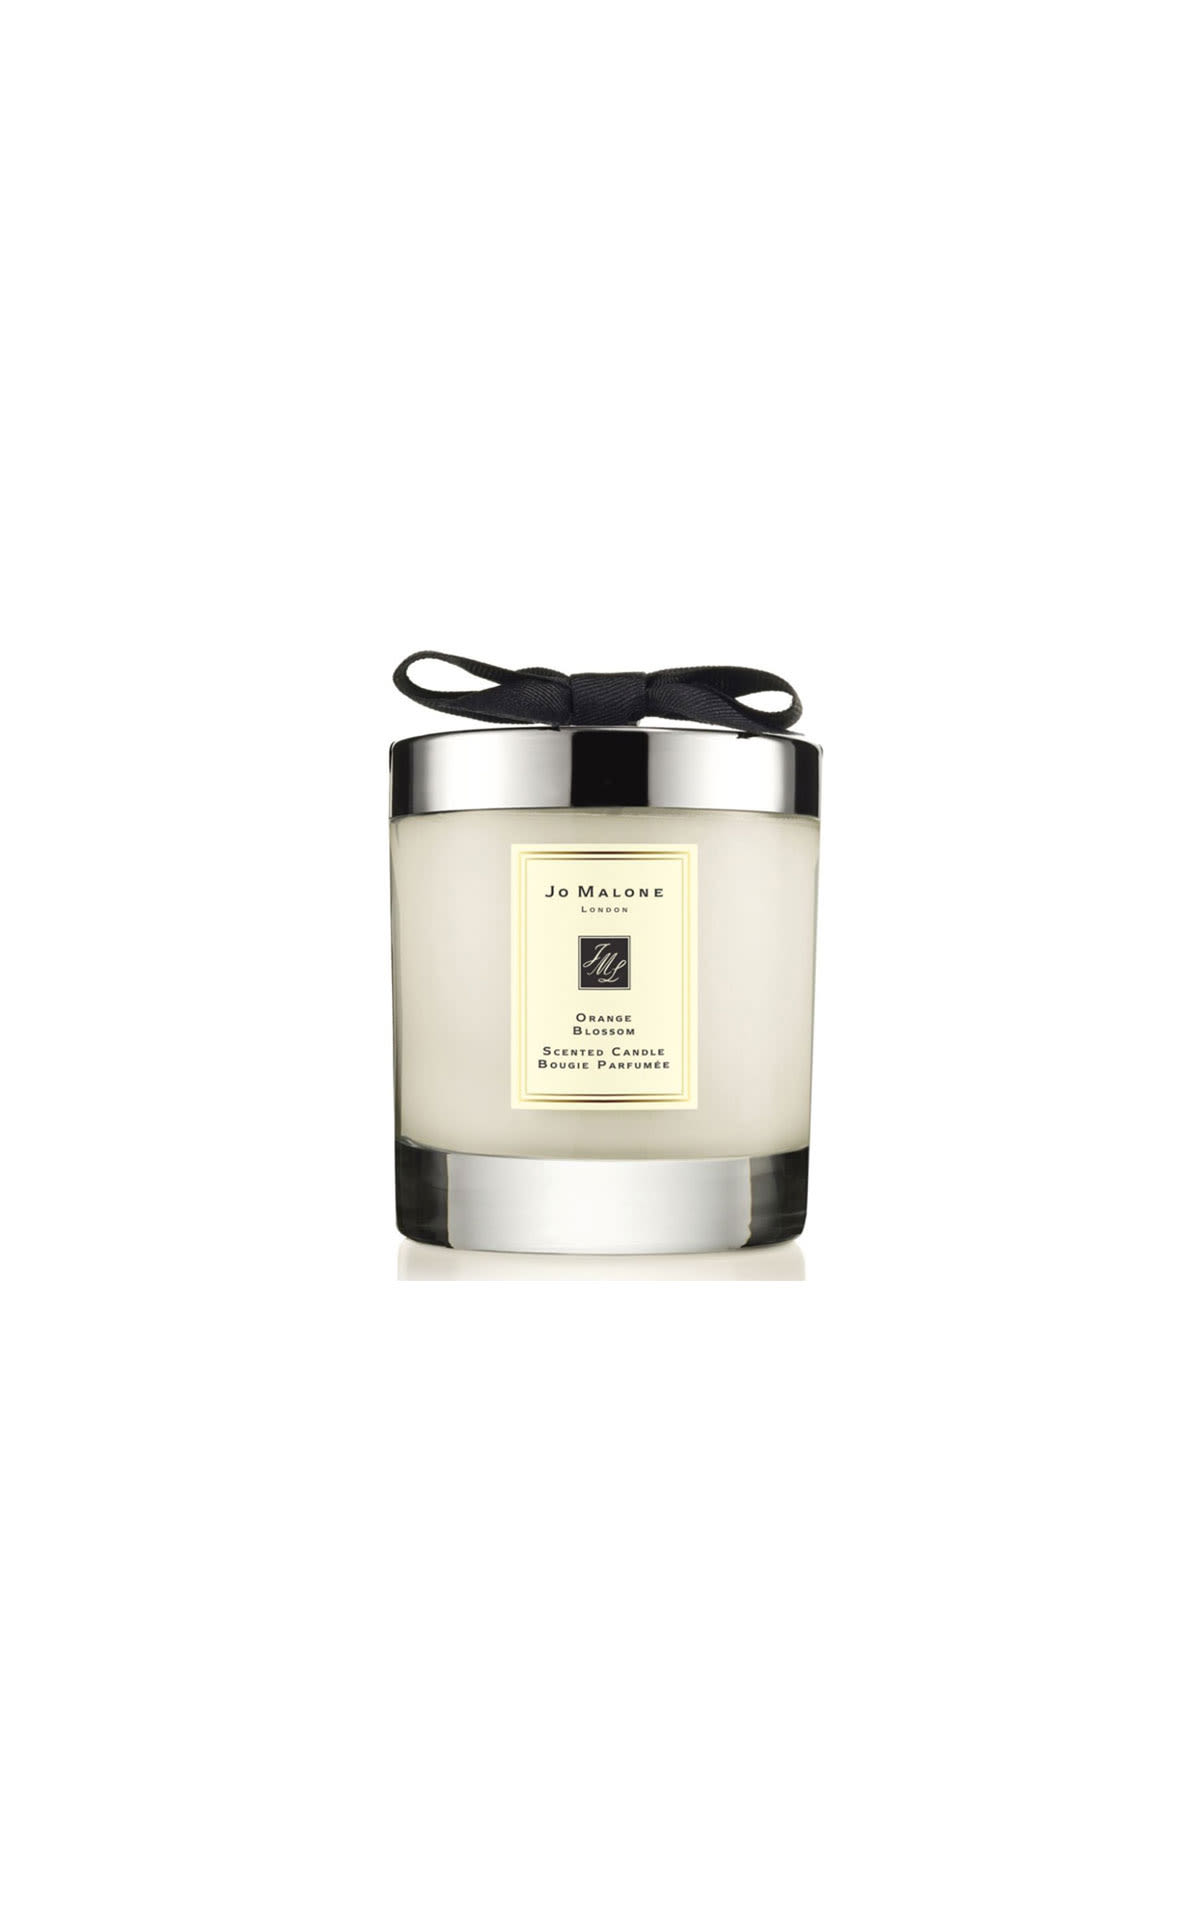 Jo Malone Orange blossom home candle from Bicester Village